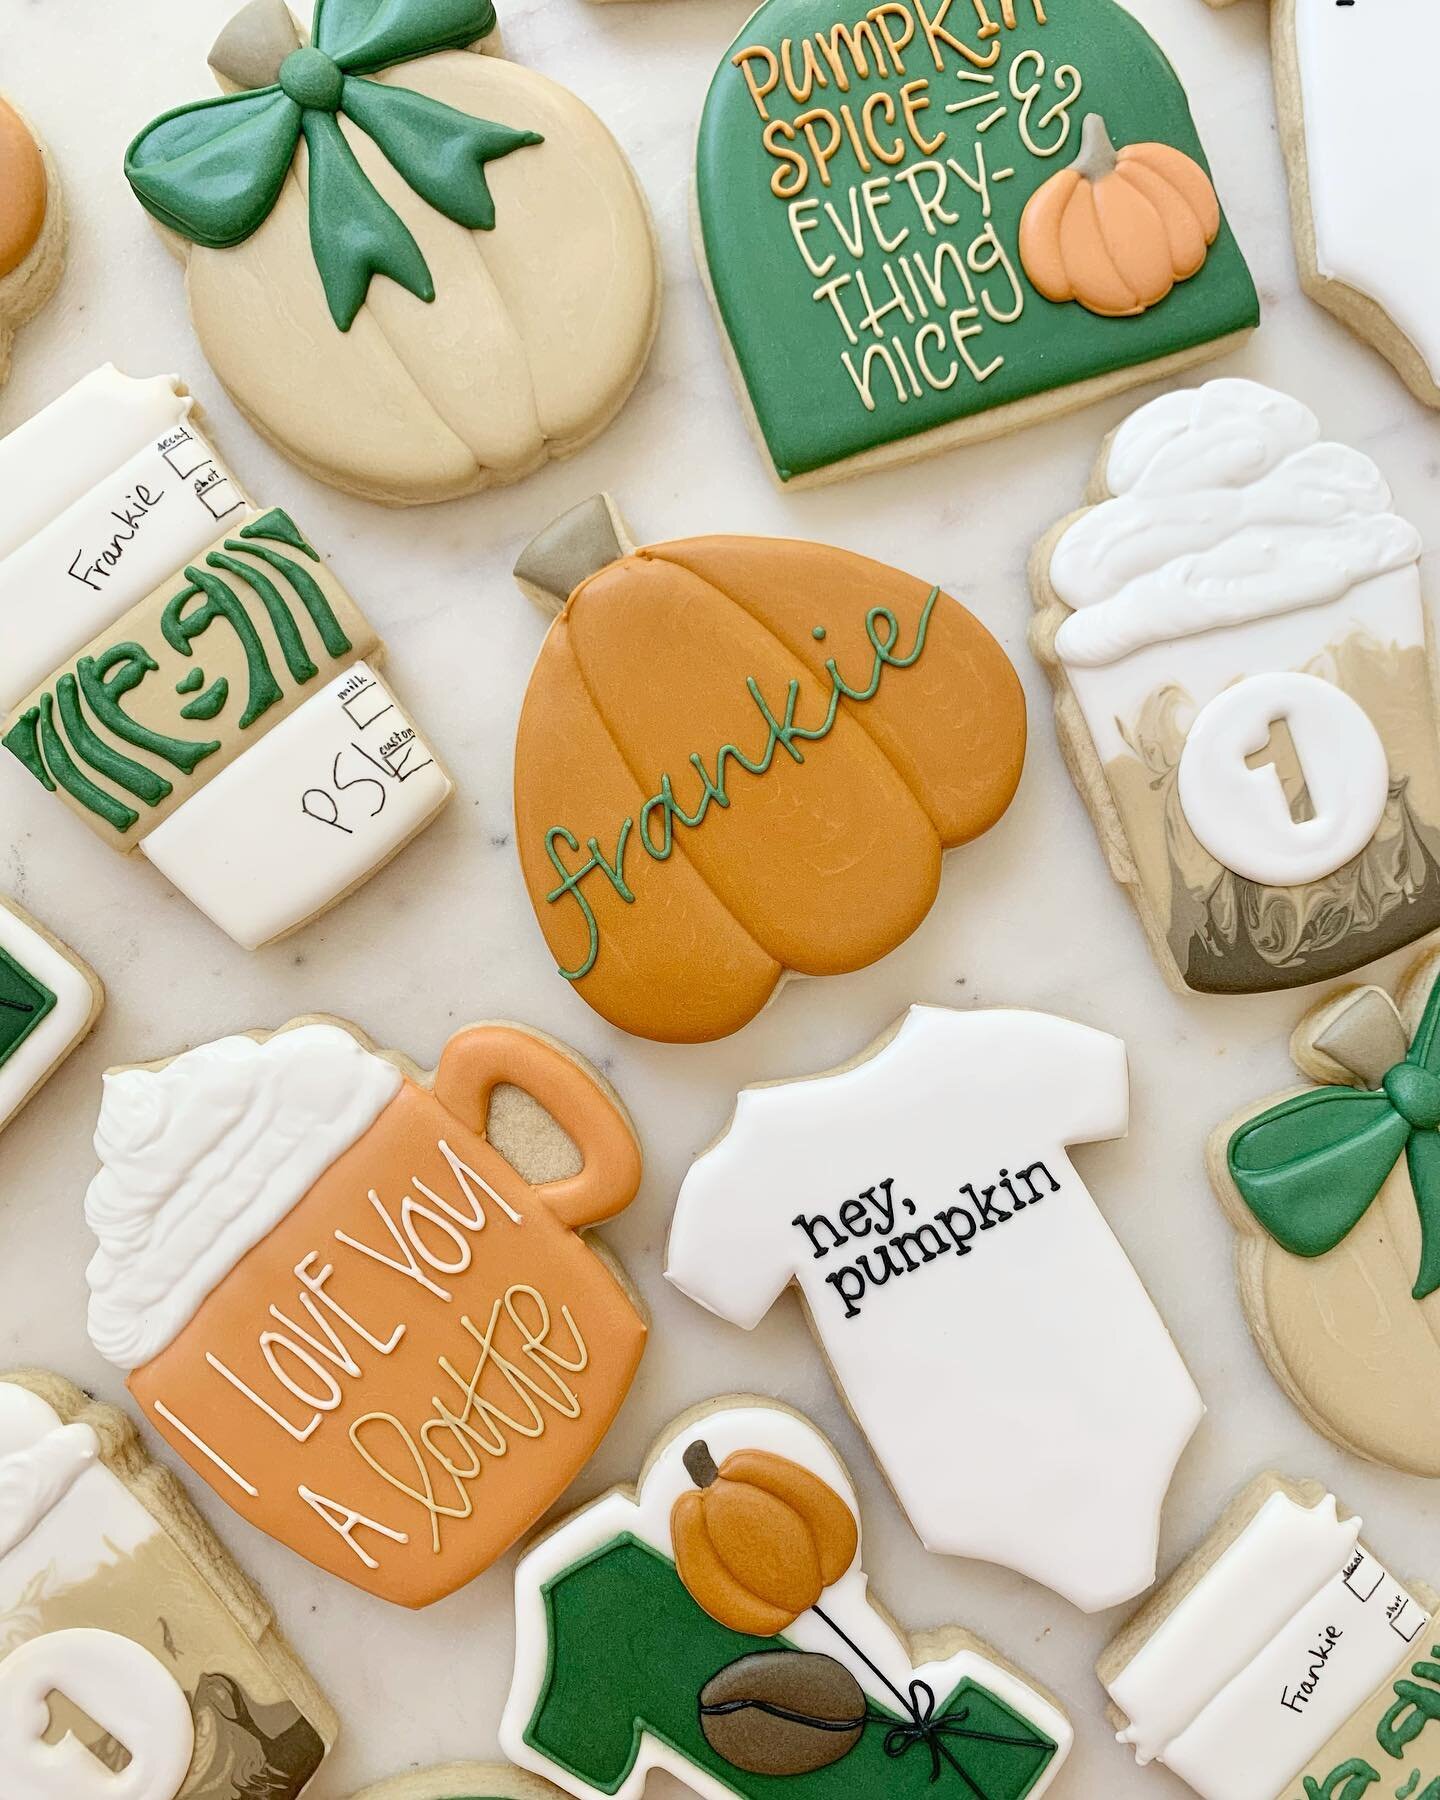 It&rsquo;s not every day that your niece turns ONE! I&rsquo;ve been brewing up these cookies in my head for literally the last year - I told my sister the day they came home from the hospital that I was going to make &ldquo;Pumpkin spice and everythi